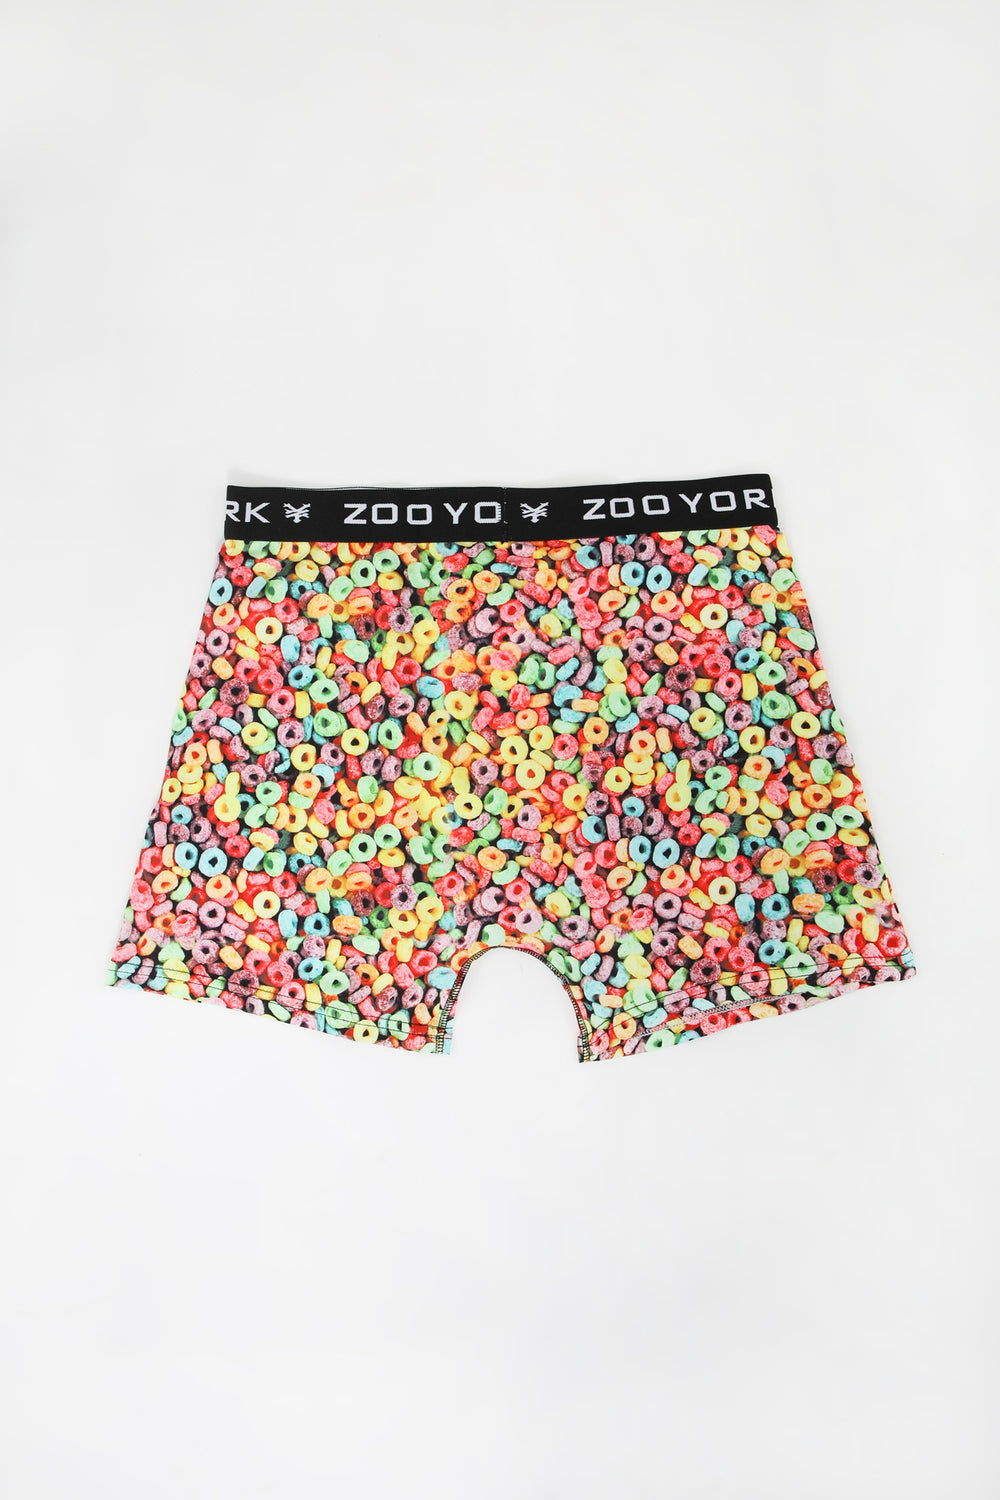 Zoo York Mens Fruity Cereal Boxer Brief - Multi / S/P